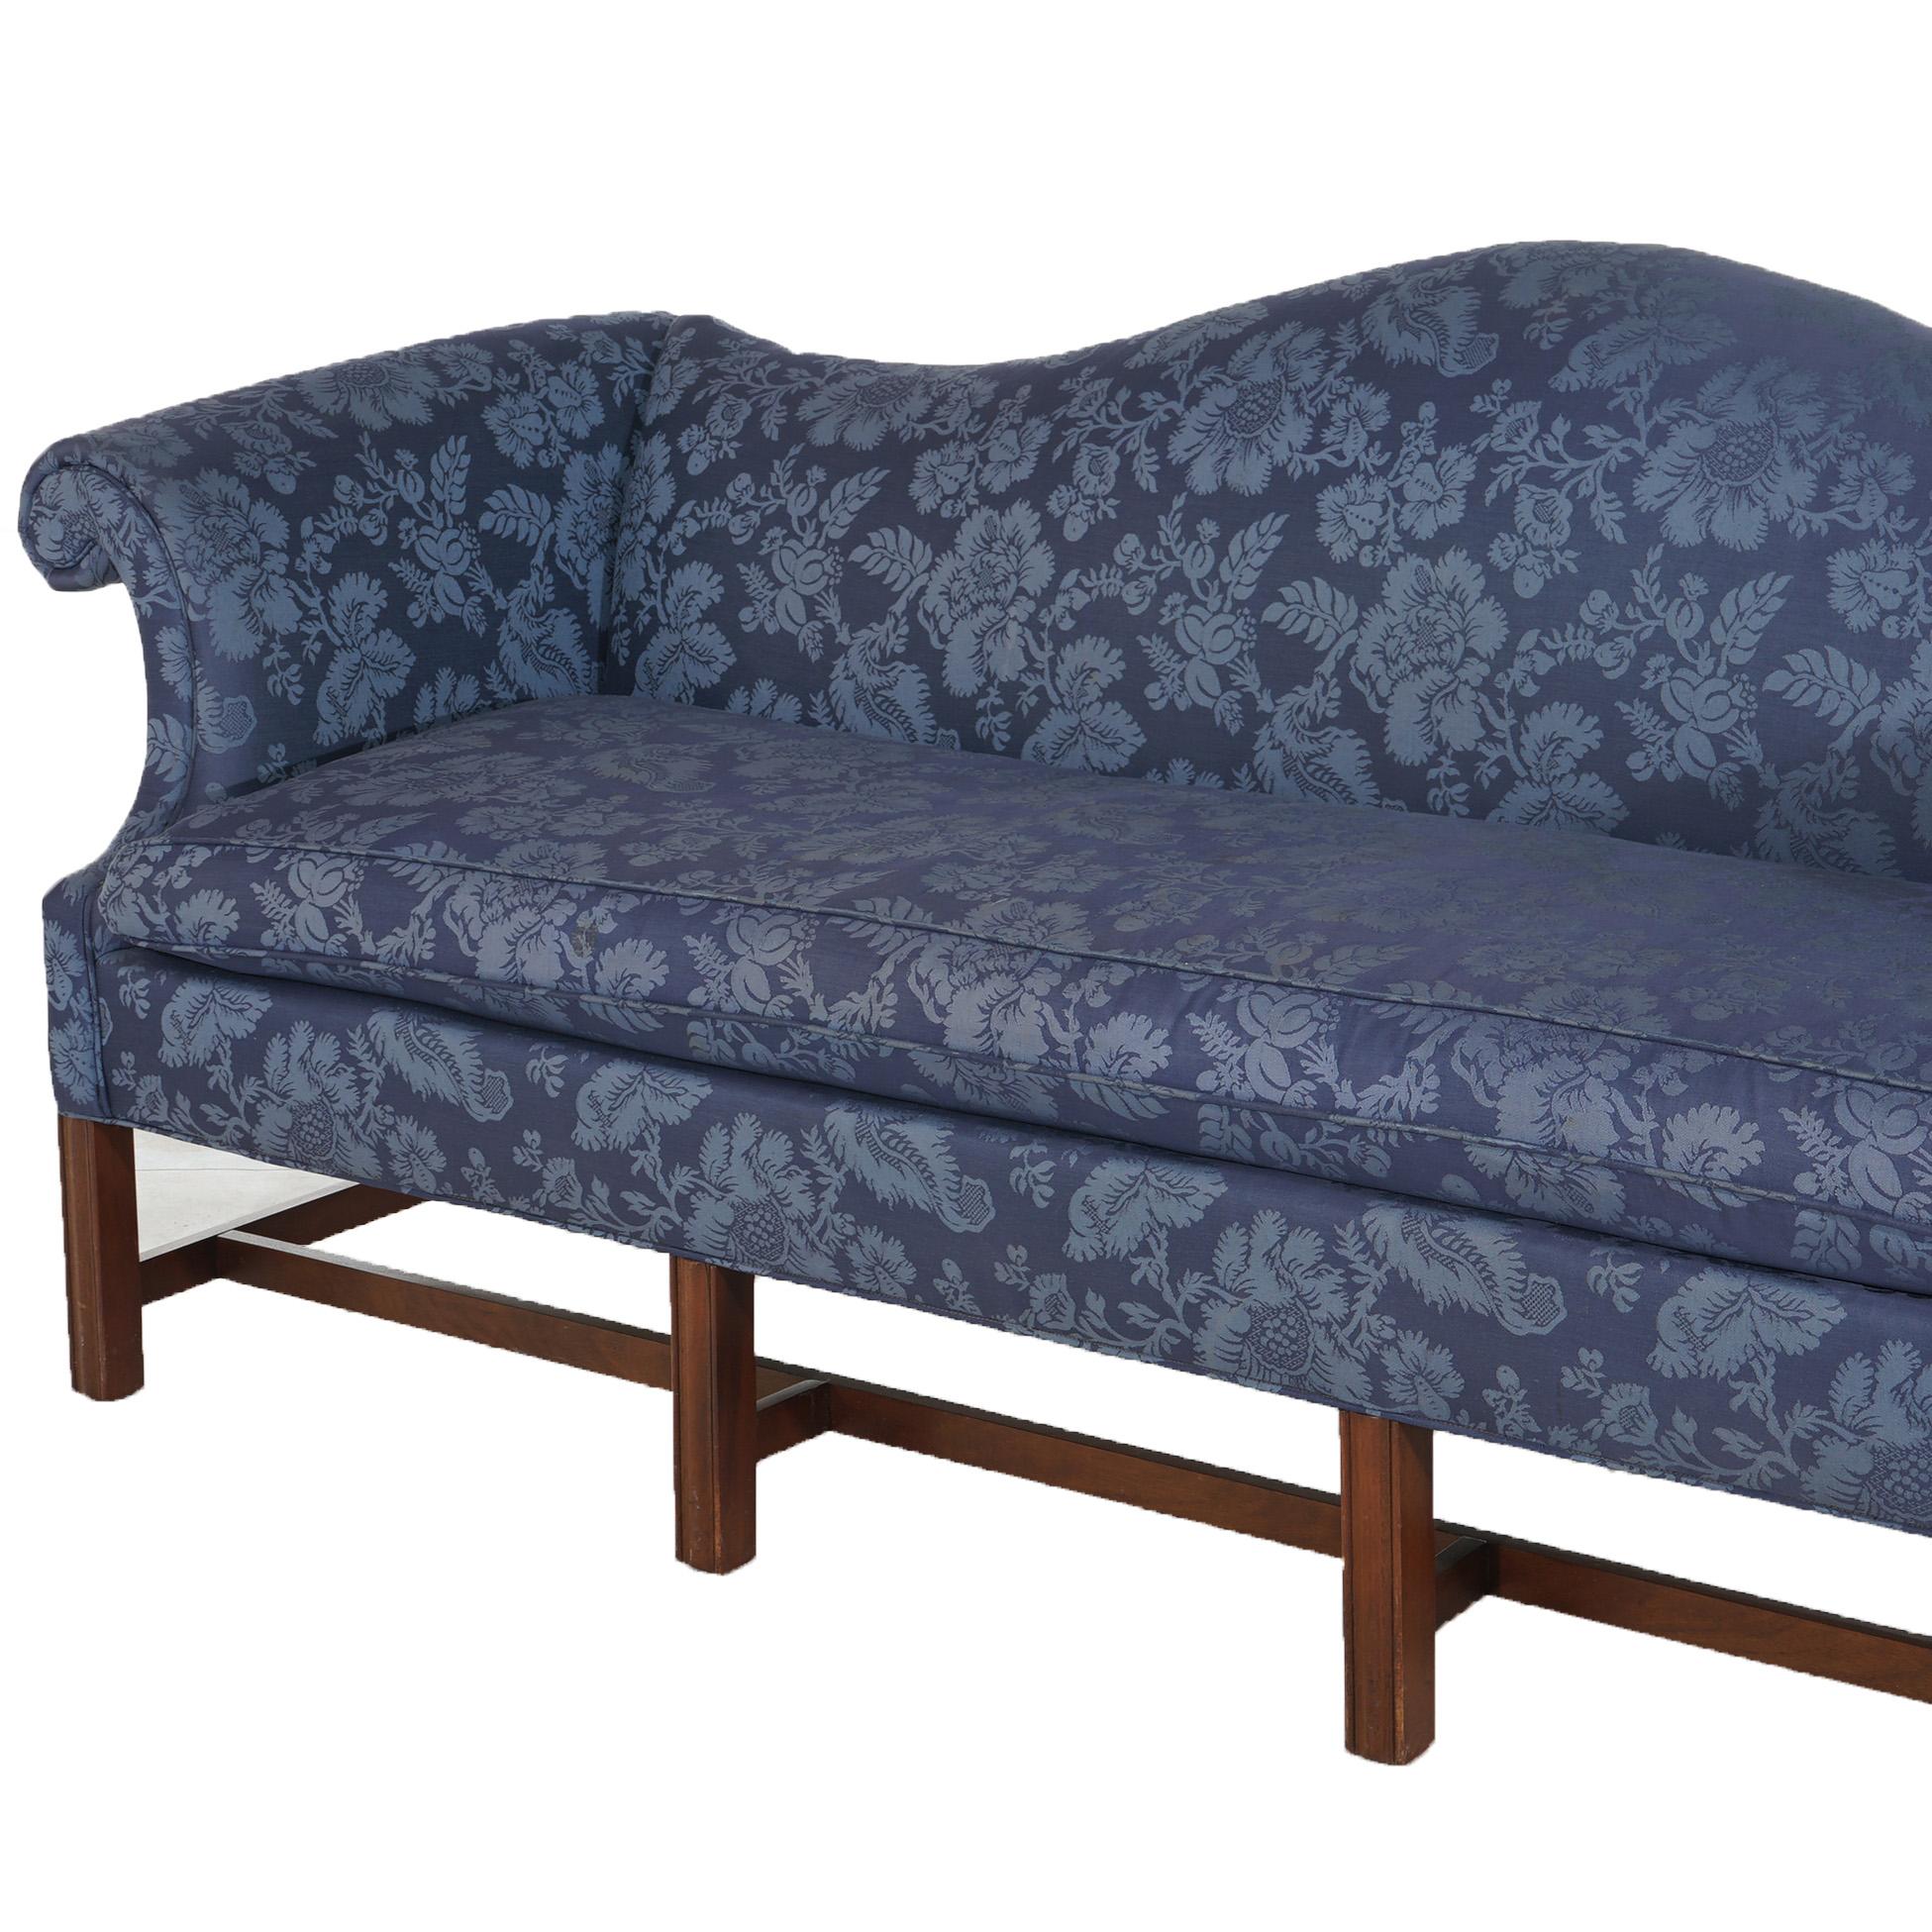 Antique Chippendale Camelback Sofa with Scroll Arms, Blue, C1930 In Good Condition For Sale In Big Flats, NY